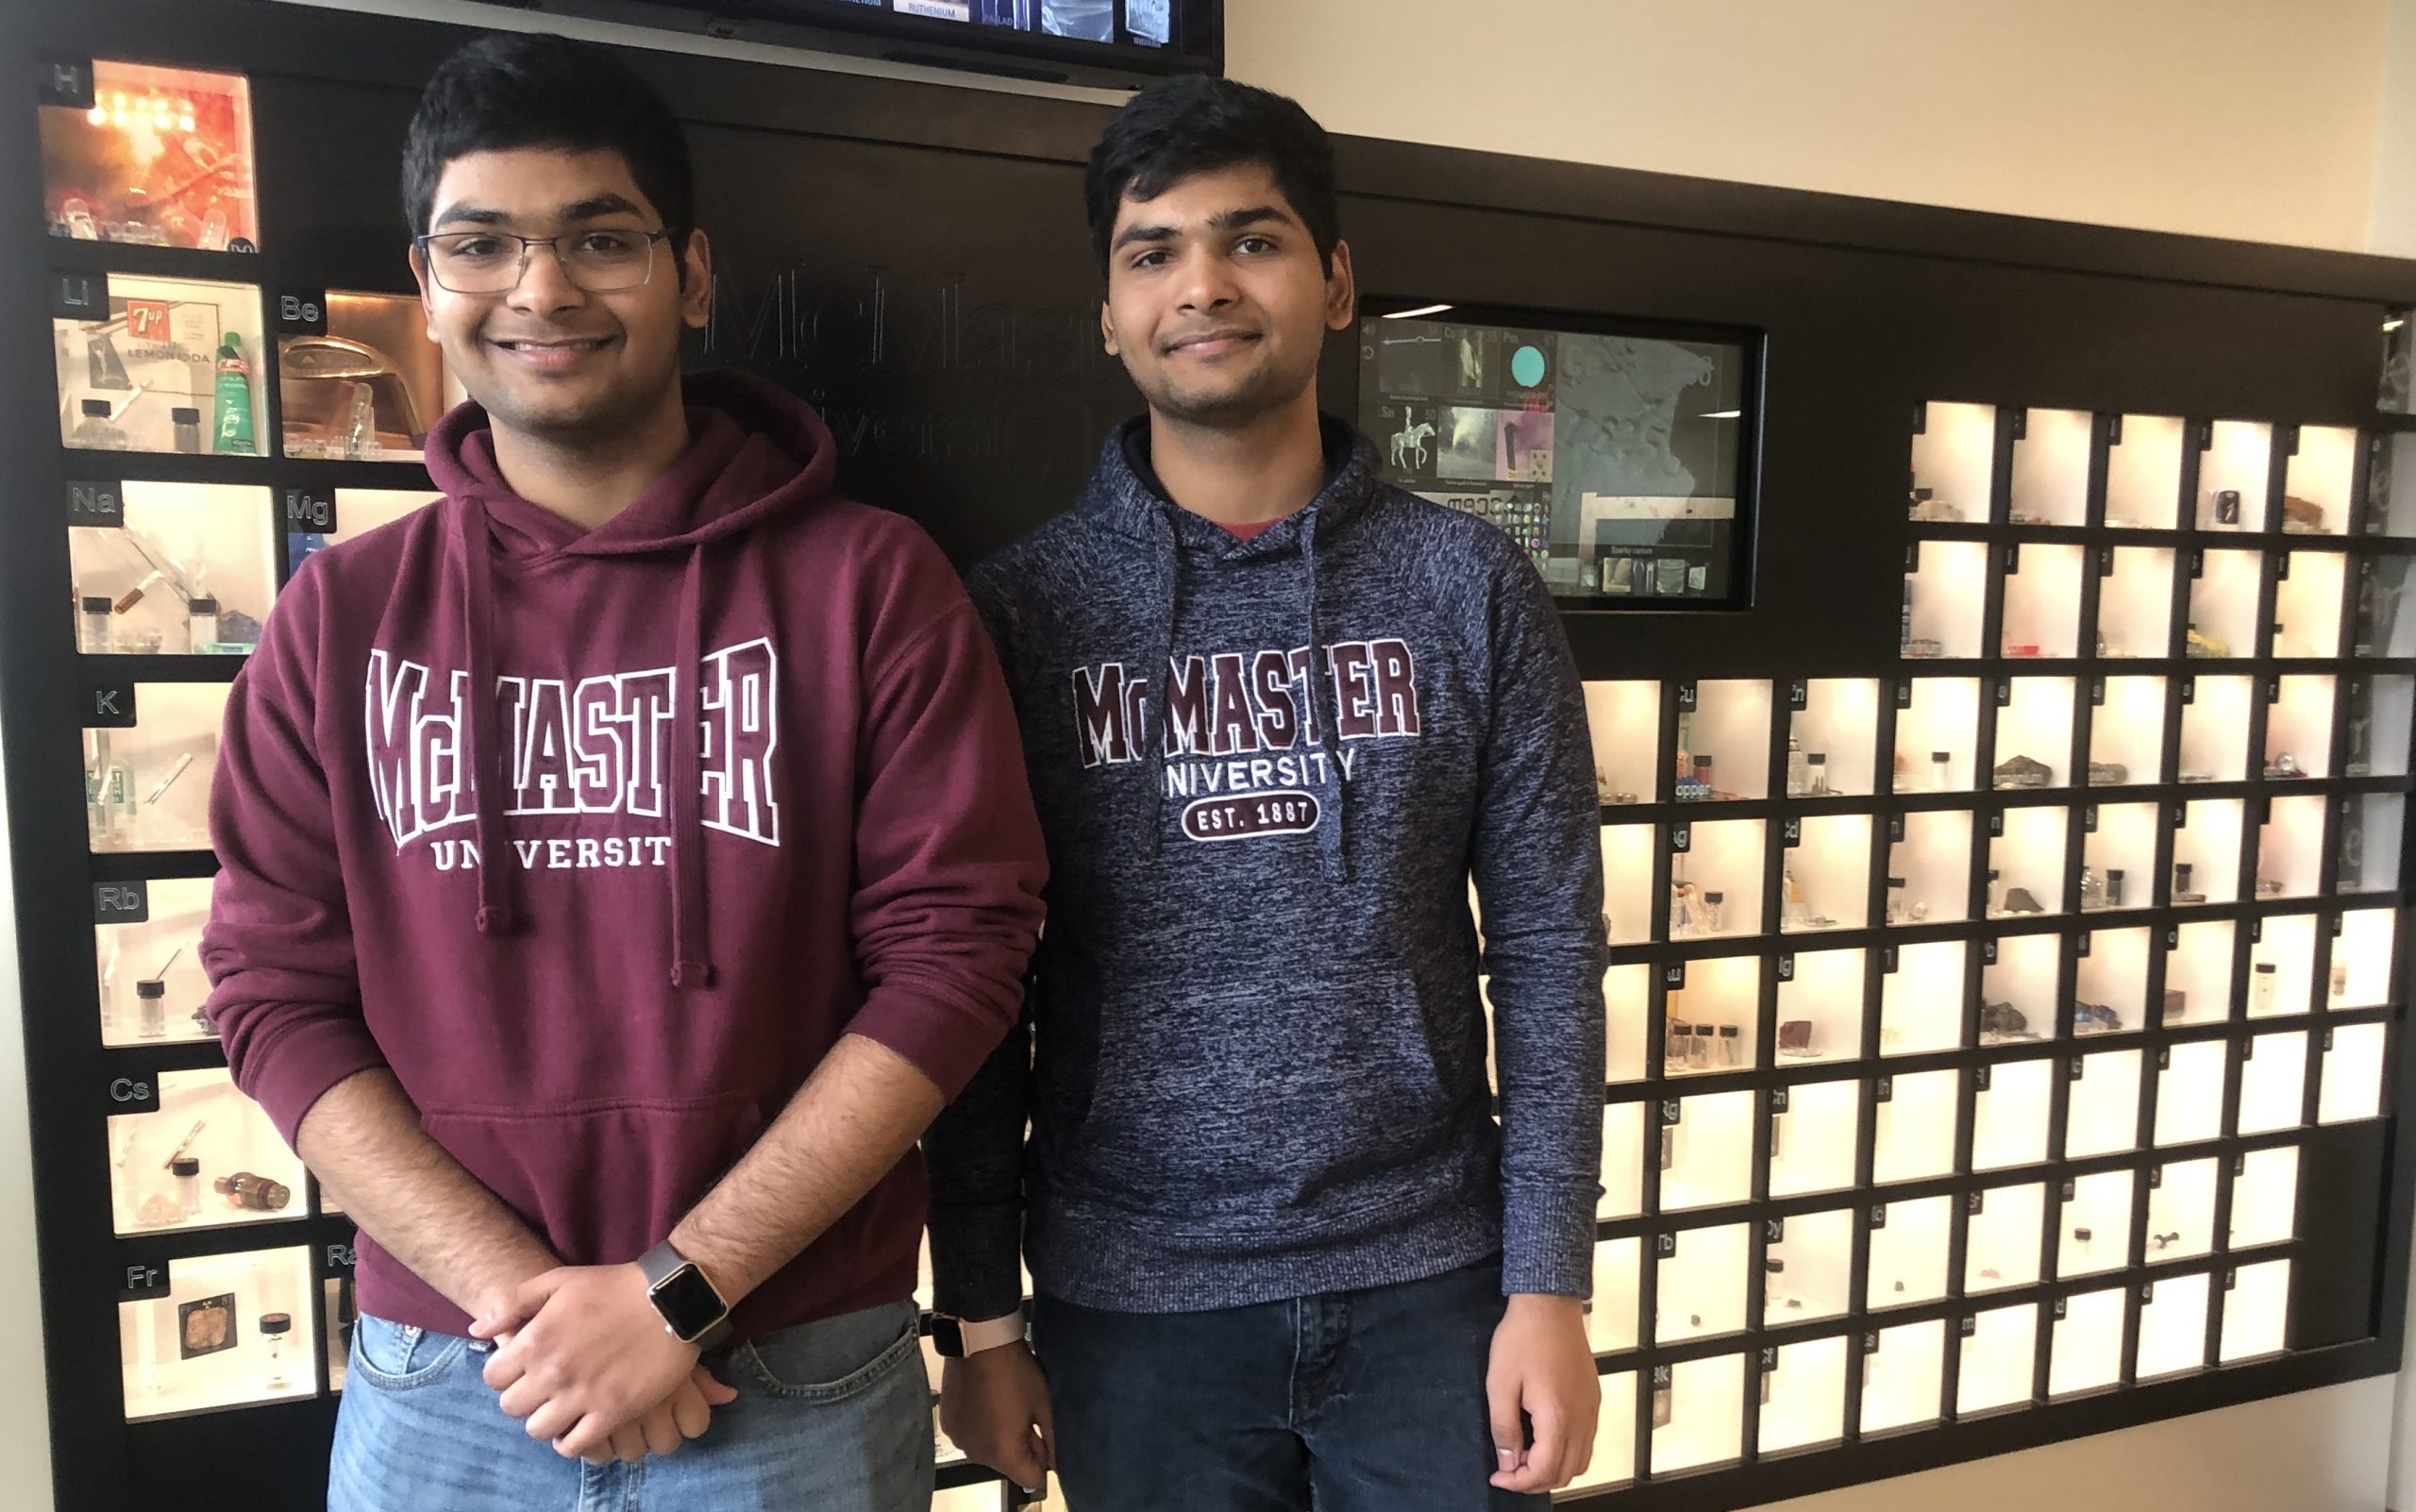 Science students Sanjit and Sujit Patel got involved in research at the end of their first year as undergraduate students.